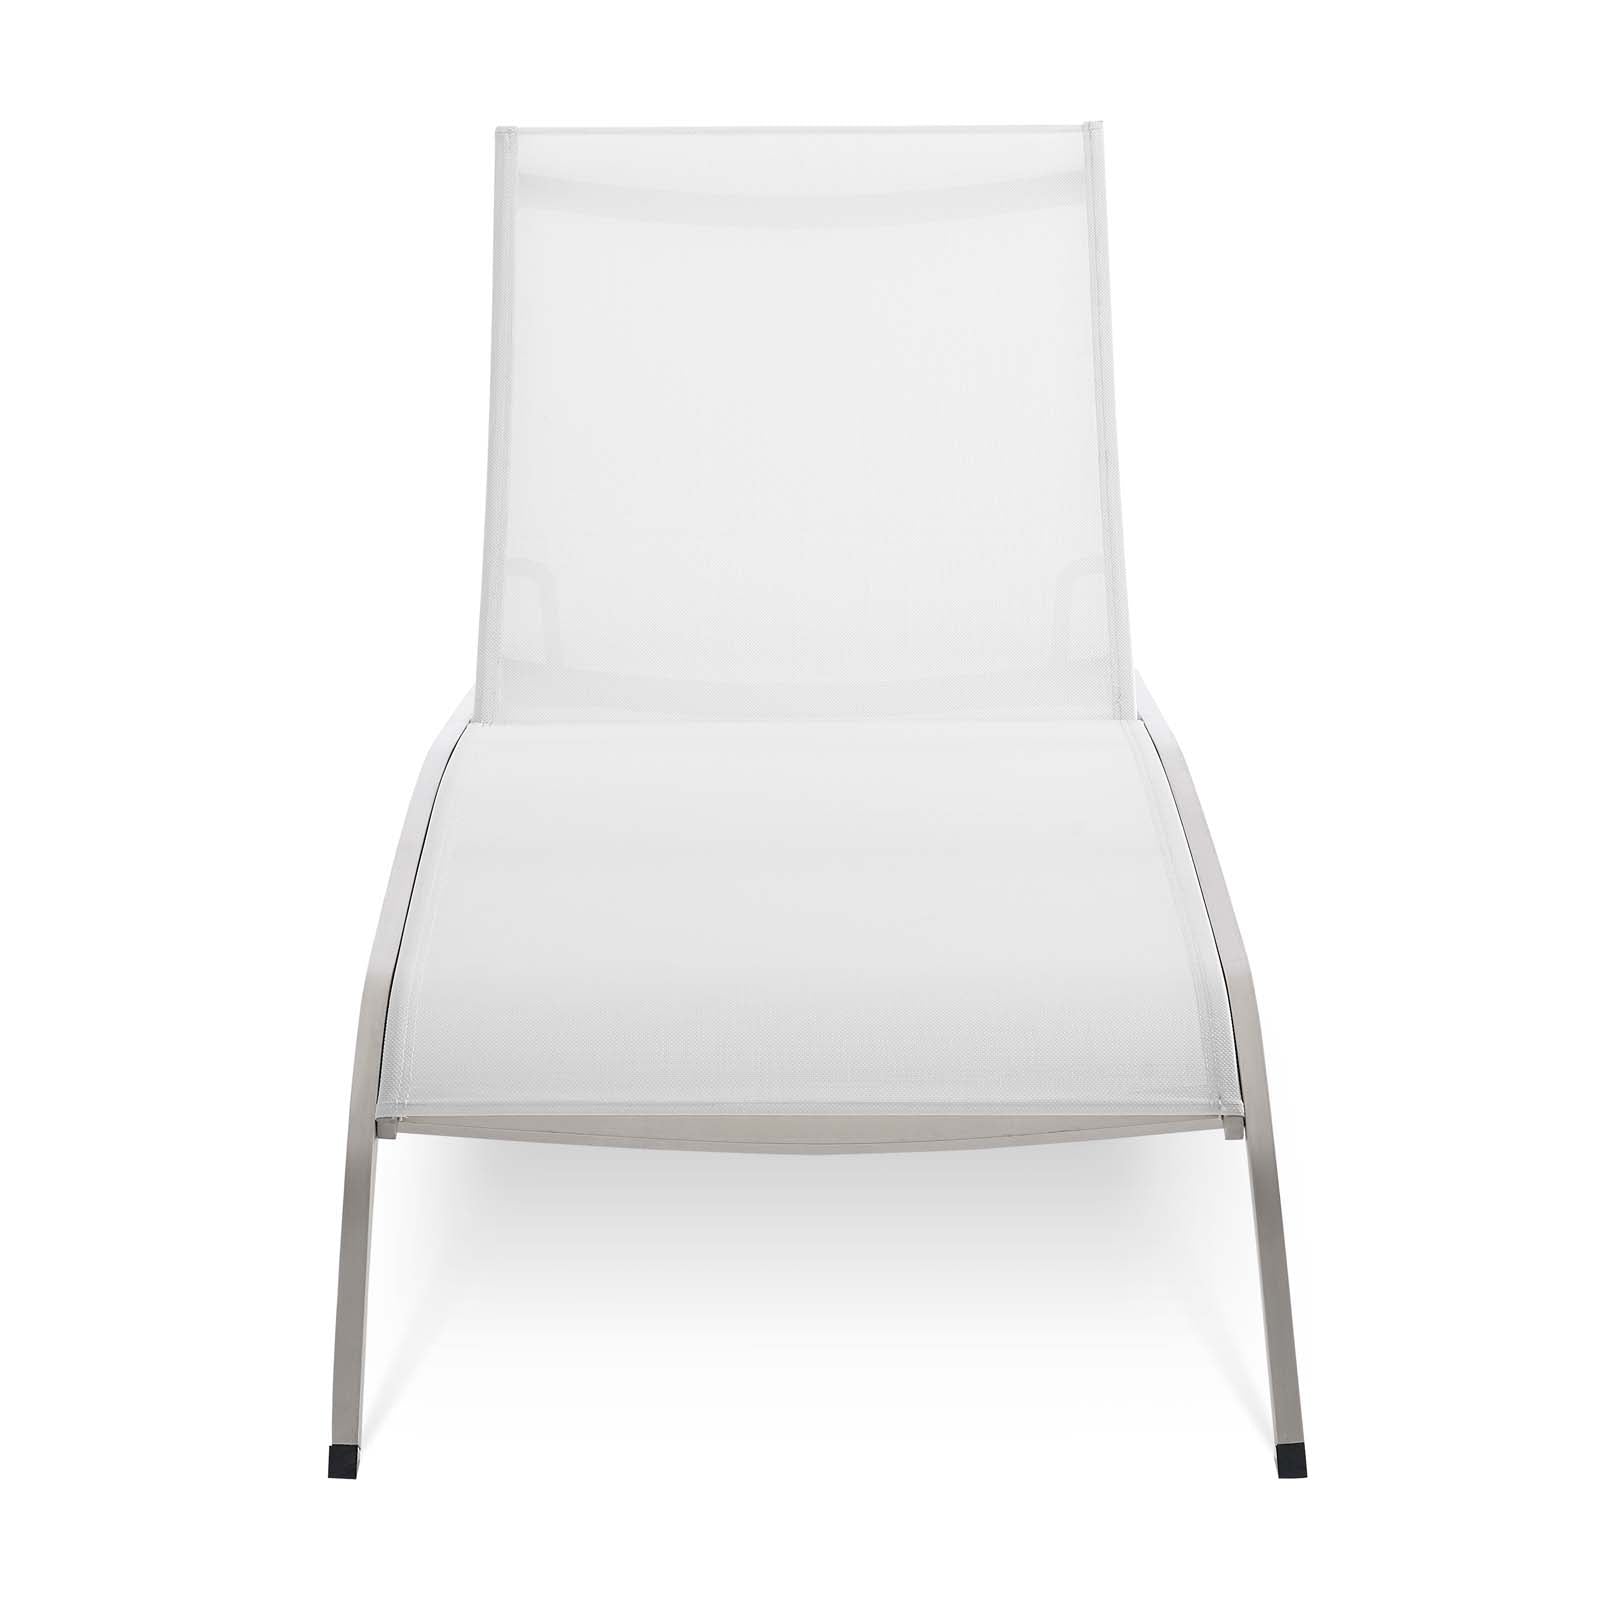 Modway Outdoor Loungers - Savannah Mesh Chaise Outdoor Patio Aluminum Lounge Chair White